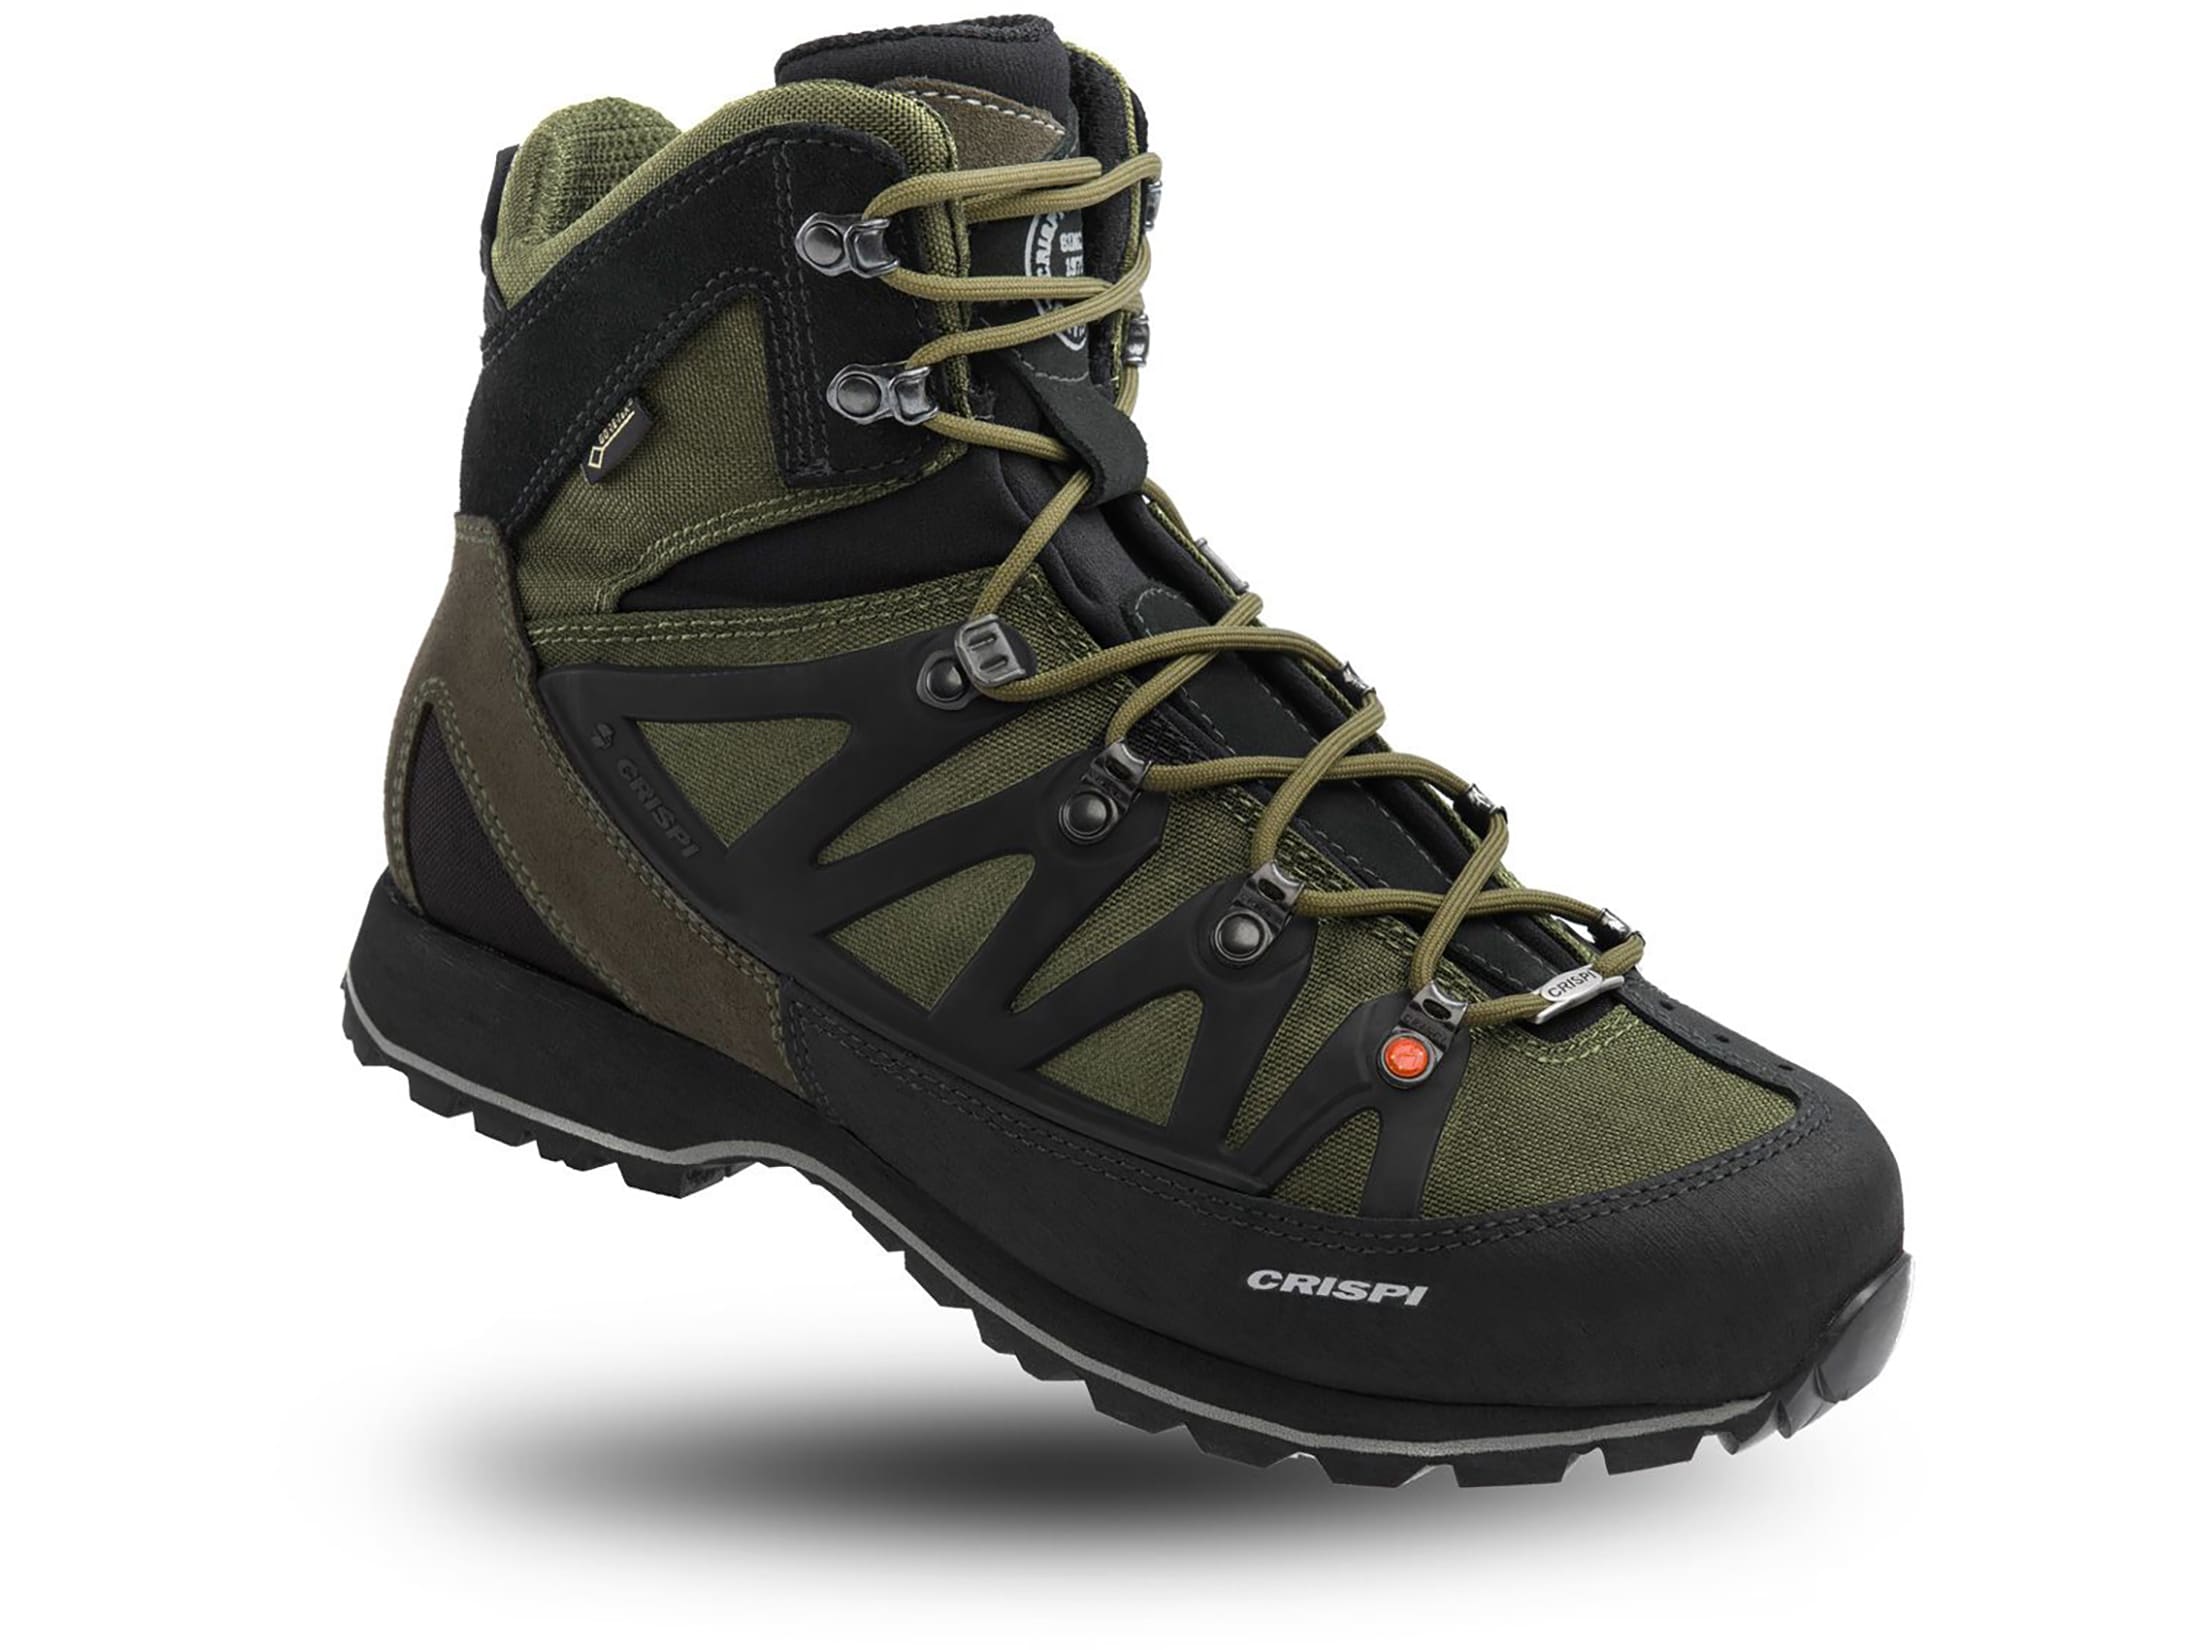 Open Package Crispi Thor GTX 8 Waterproof GORE-TEX Hiking Boots